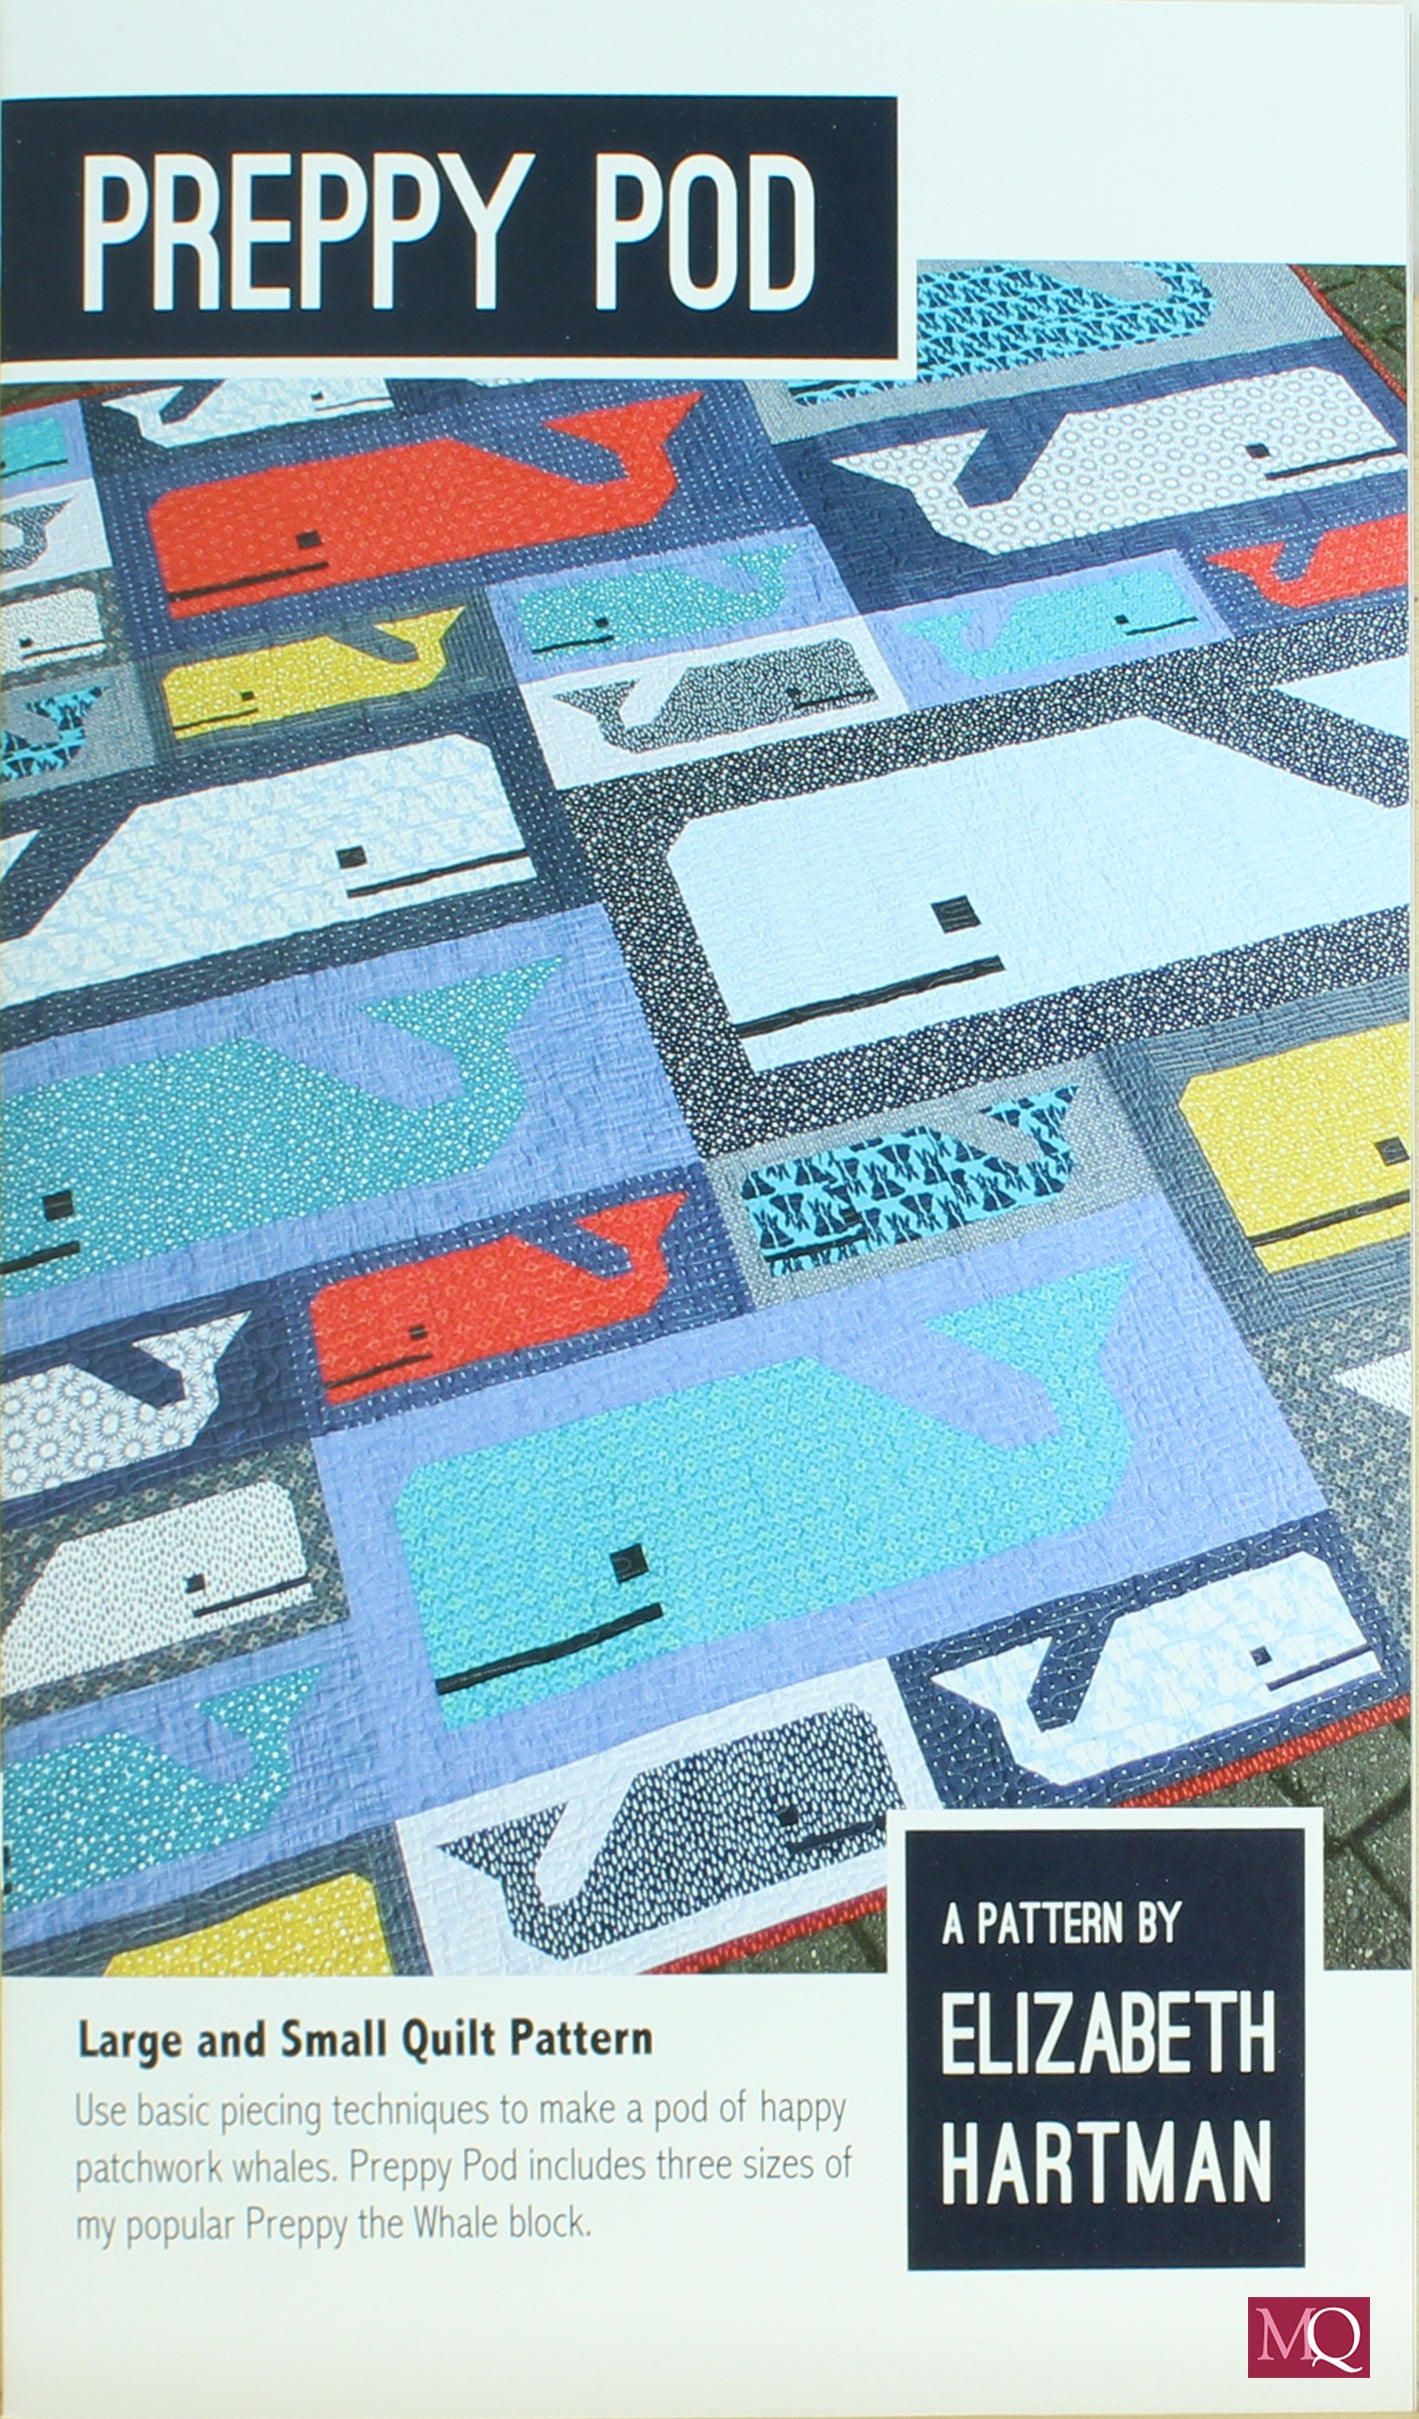 Preppy Pod Quilt Pattern £10.00 Reduced Now £7.00